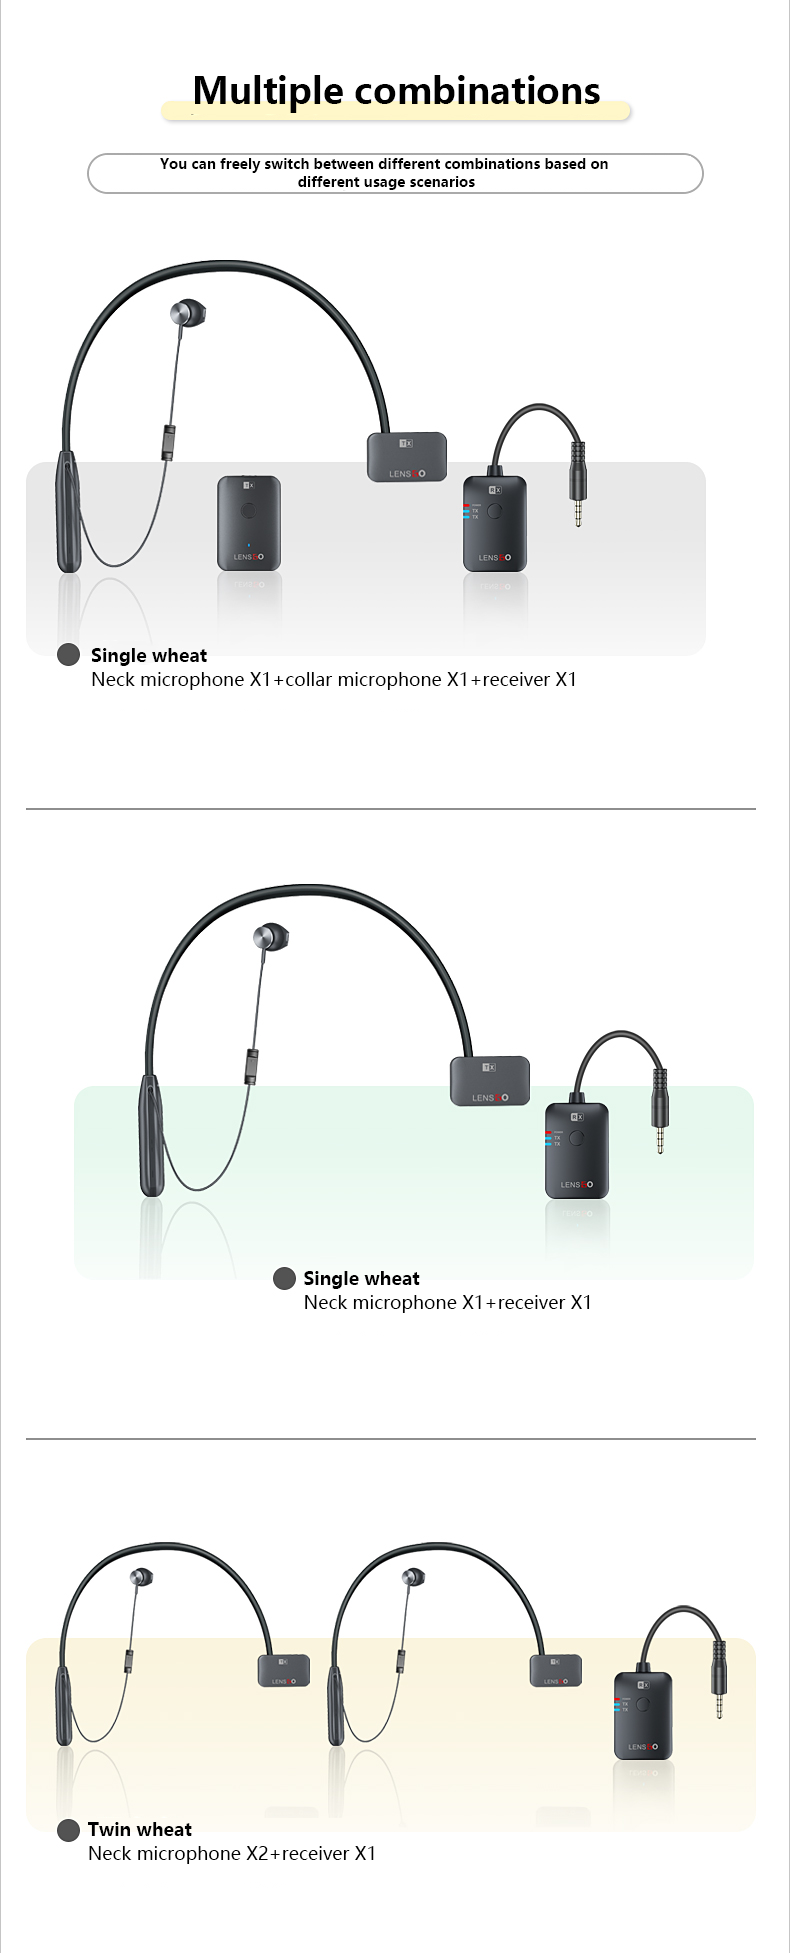 LENSGO 318D Mini Wireless Lavalier Microphone All-in-one 1RX 2TX Video Micro Noise Reduction for Phones/Cameras/Live Streaming